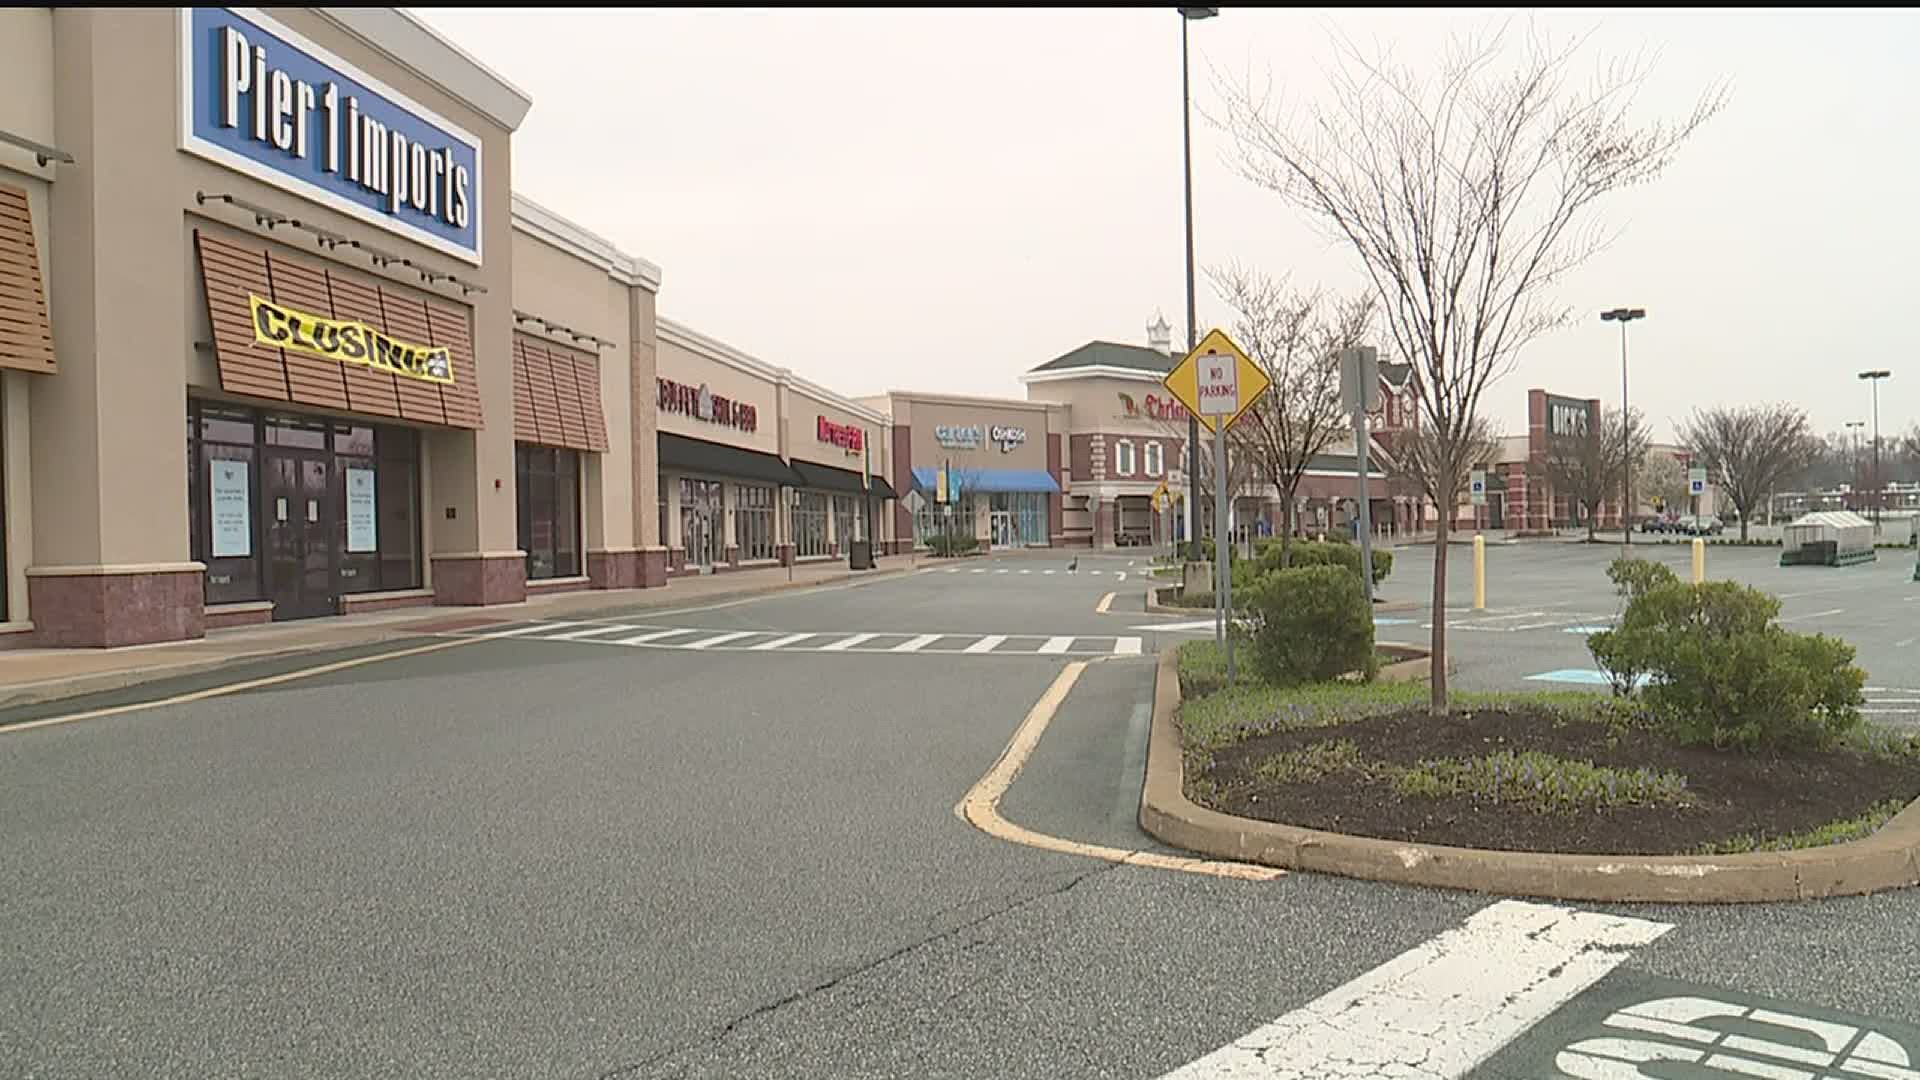 FOX43 photojournalist Nick Waldner captured this footage of quiet, empty streets in the area as locals heed Gov. Tom Wolf's stay-at-home order to fight COVID-19